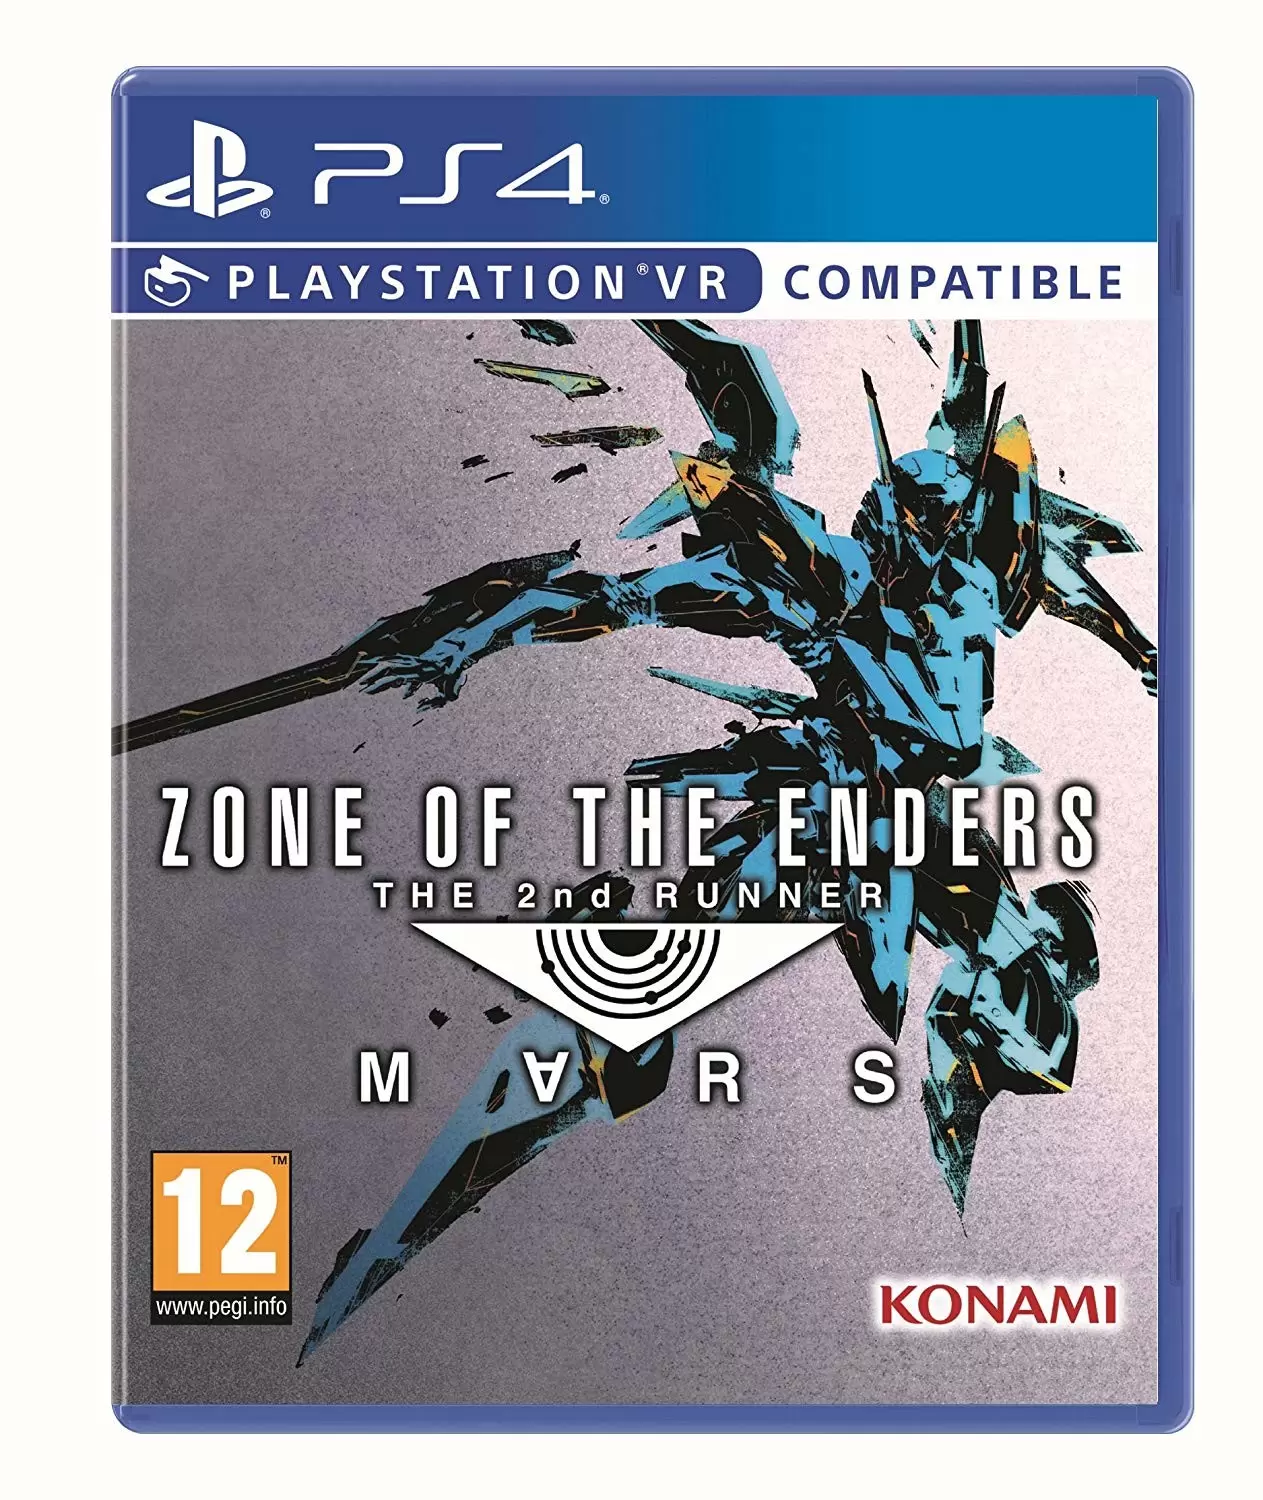 PS4 Games - Zone of the Enders The 2nd Runner Mars